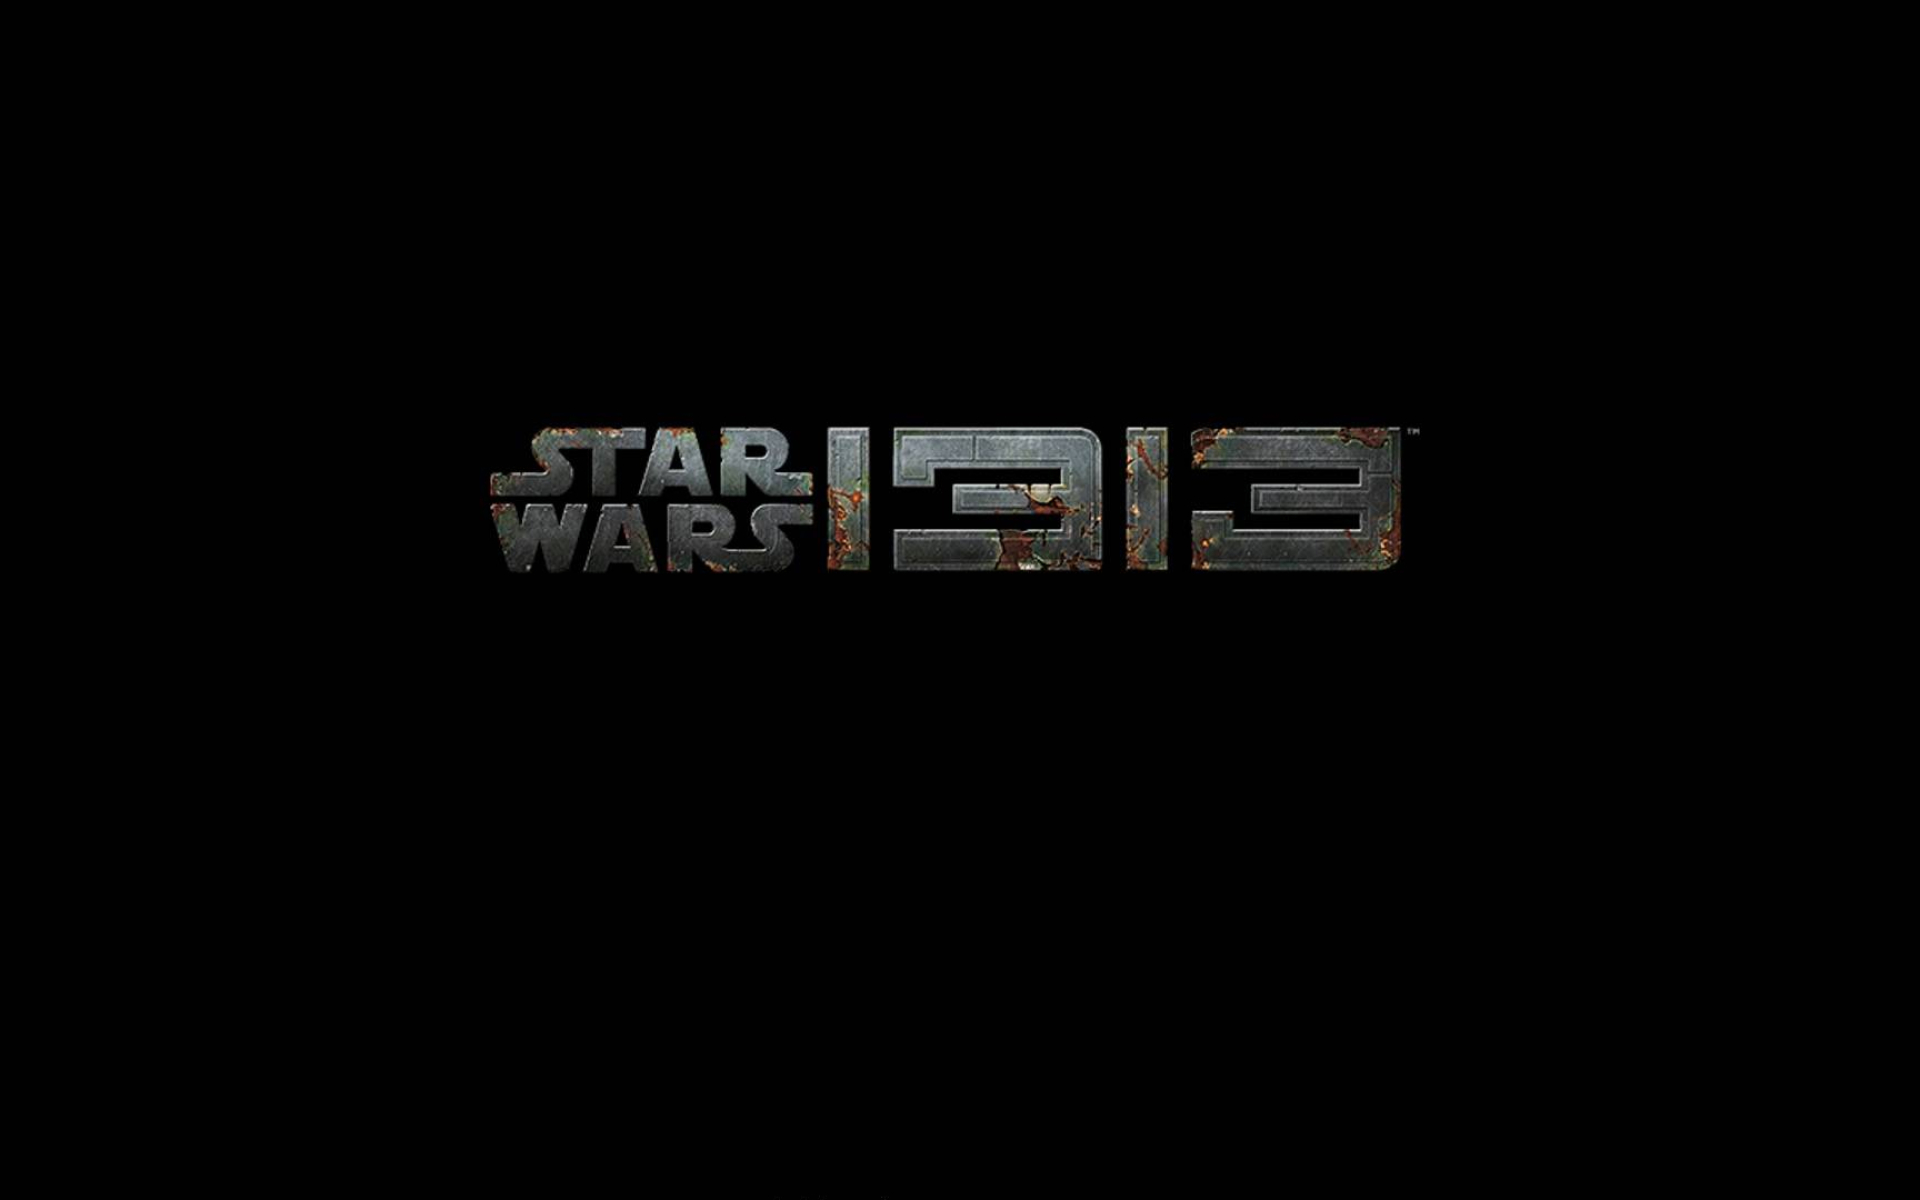 1920x1200 Star Wars 1313 Wallpapers in HD | Page 2